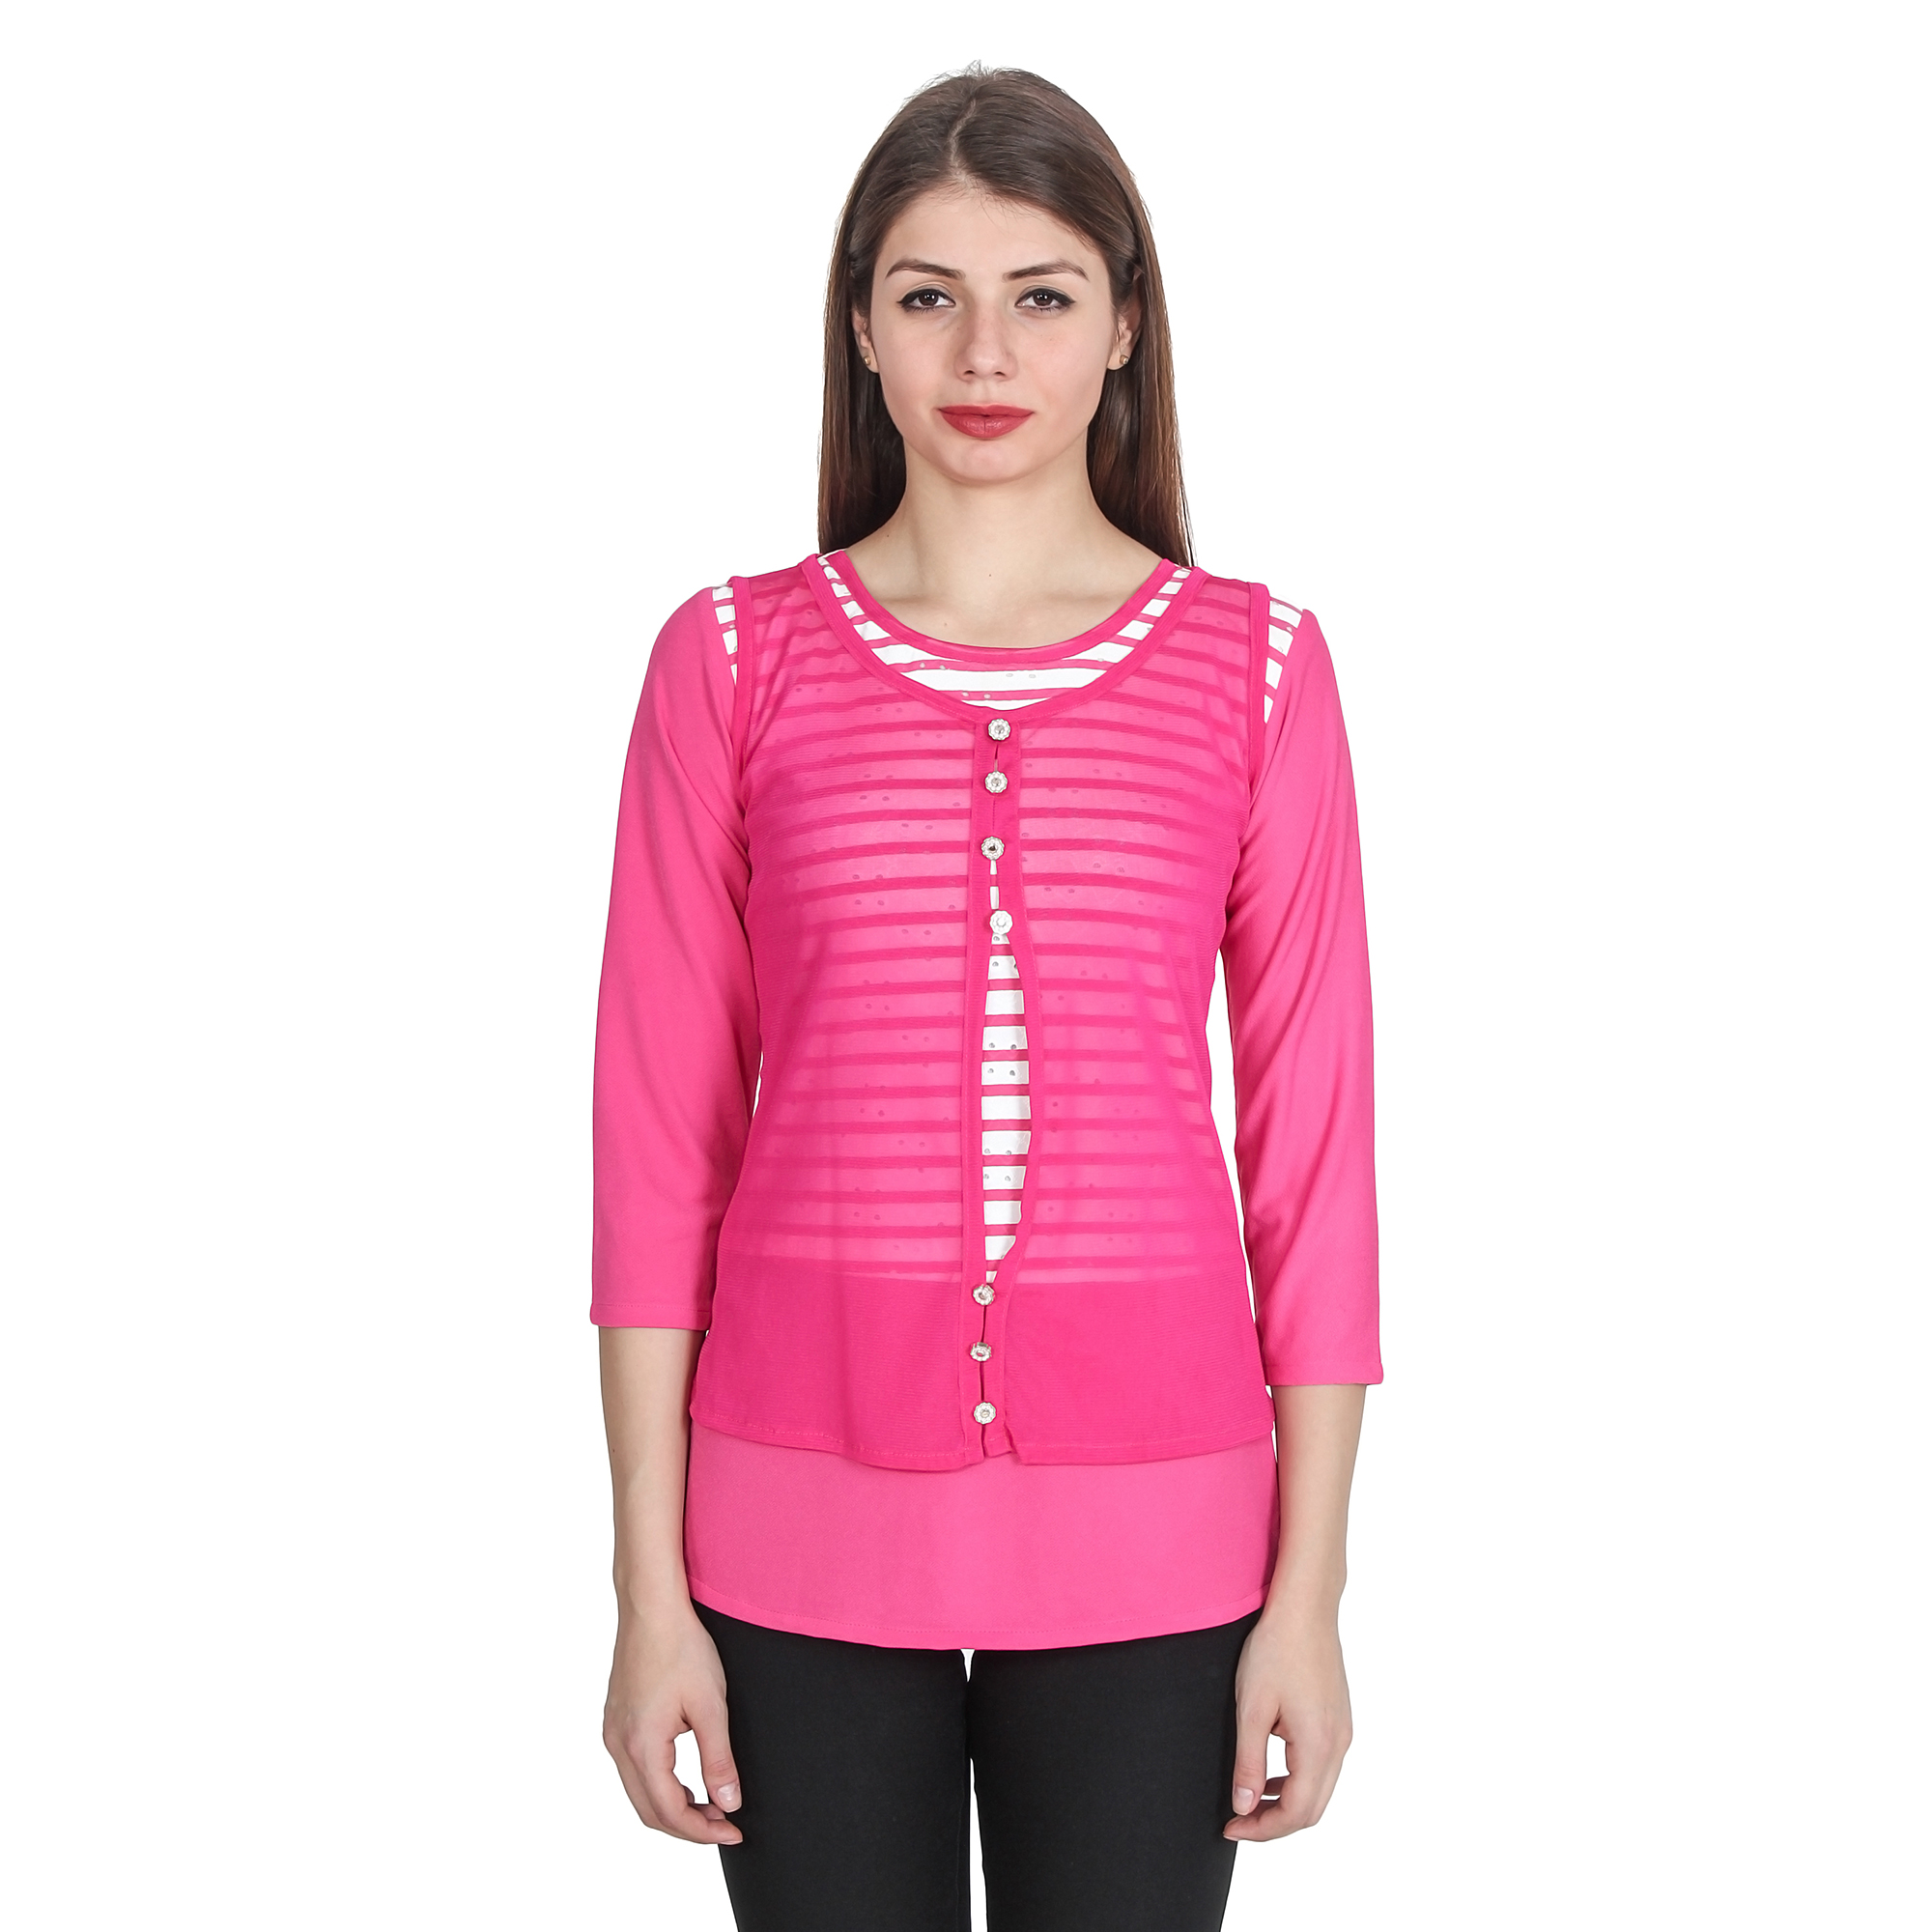 Buy ADI Pink Plain Round Neck Top Online @ ₹649 from ShopClues